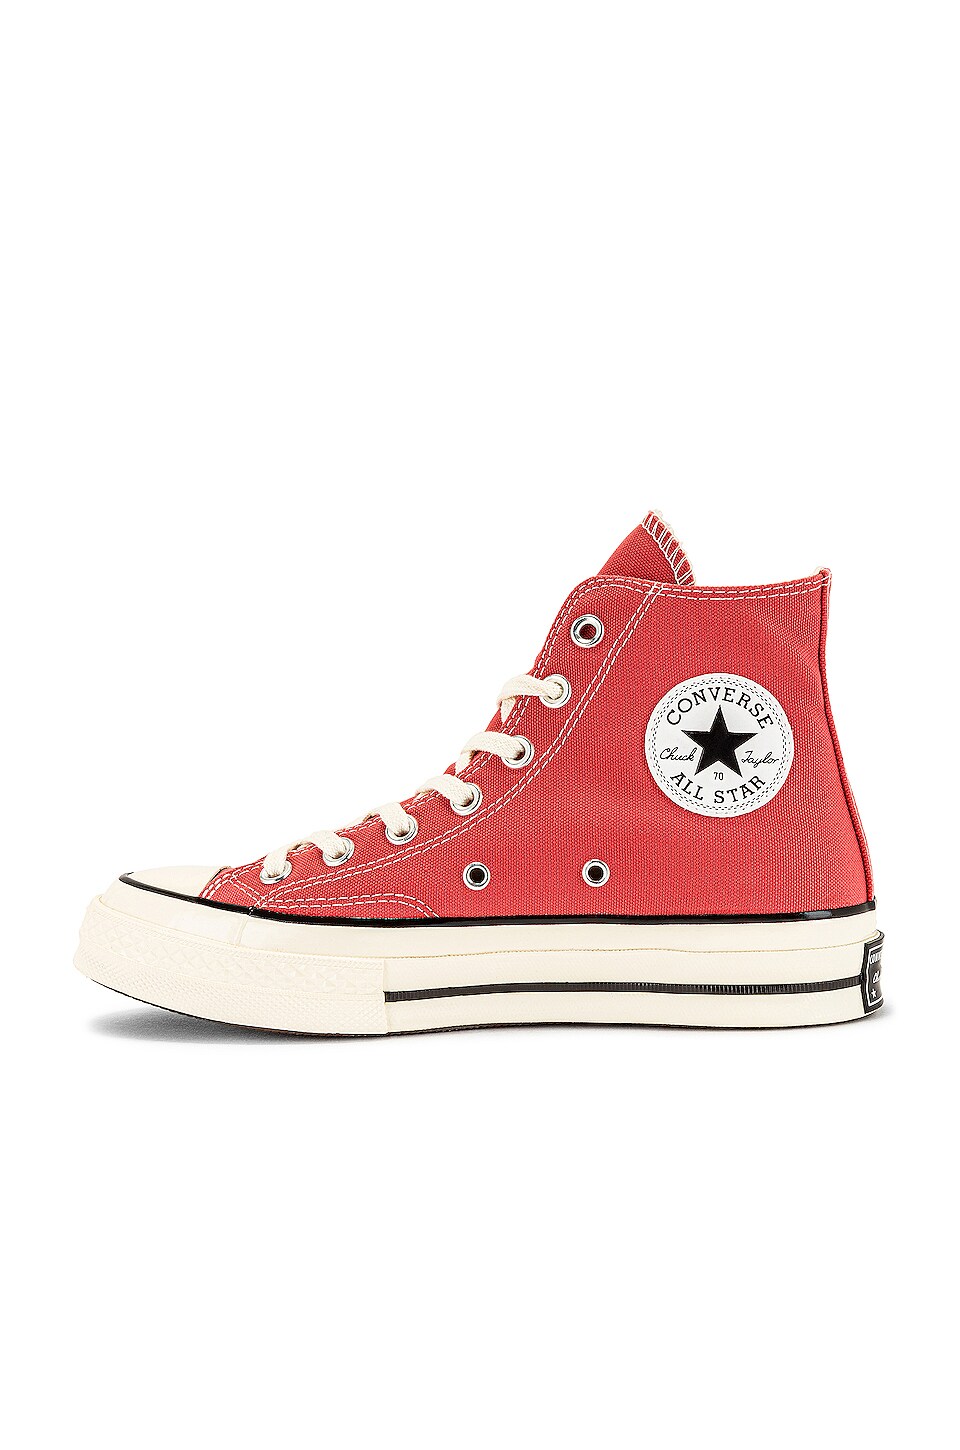 Converse Chuck 70 Seasonal Color Recycled Canvas Sneaker in Terracotta ...